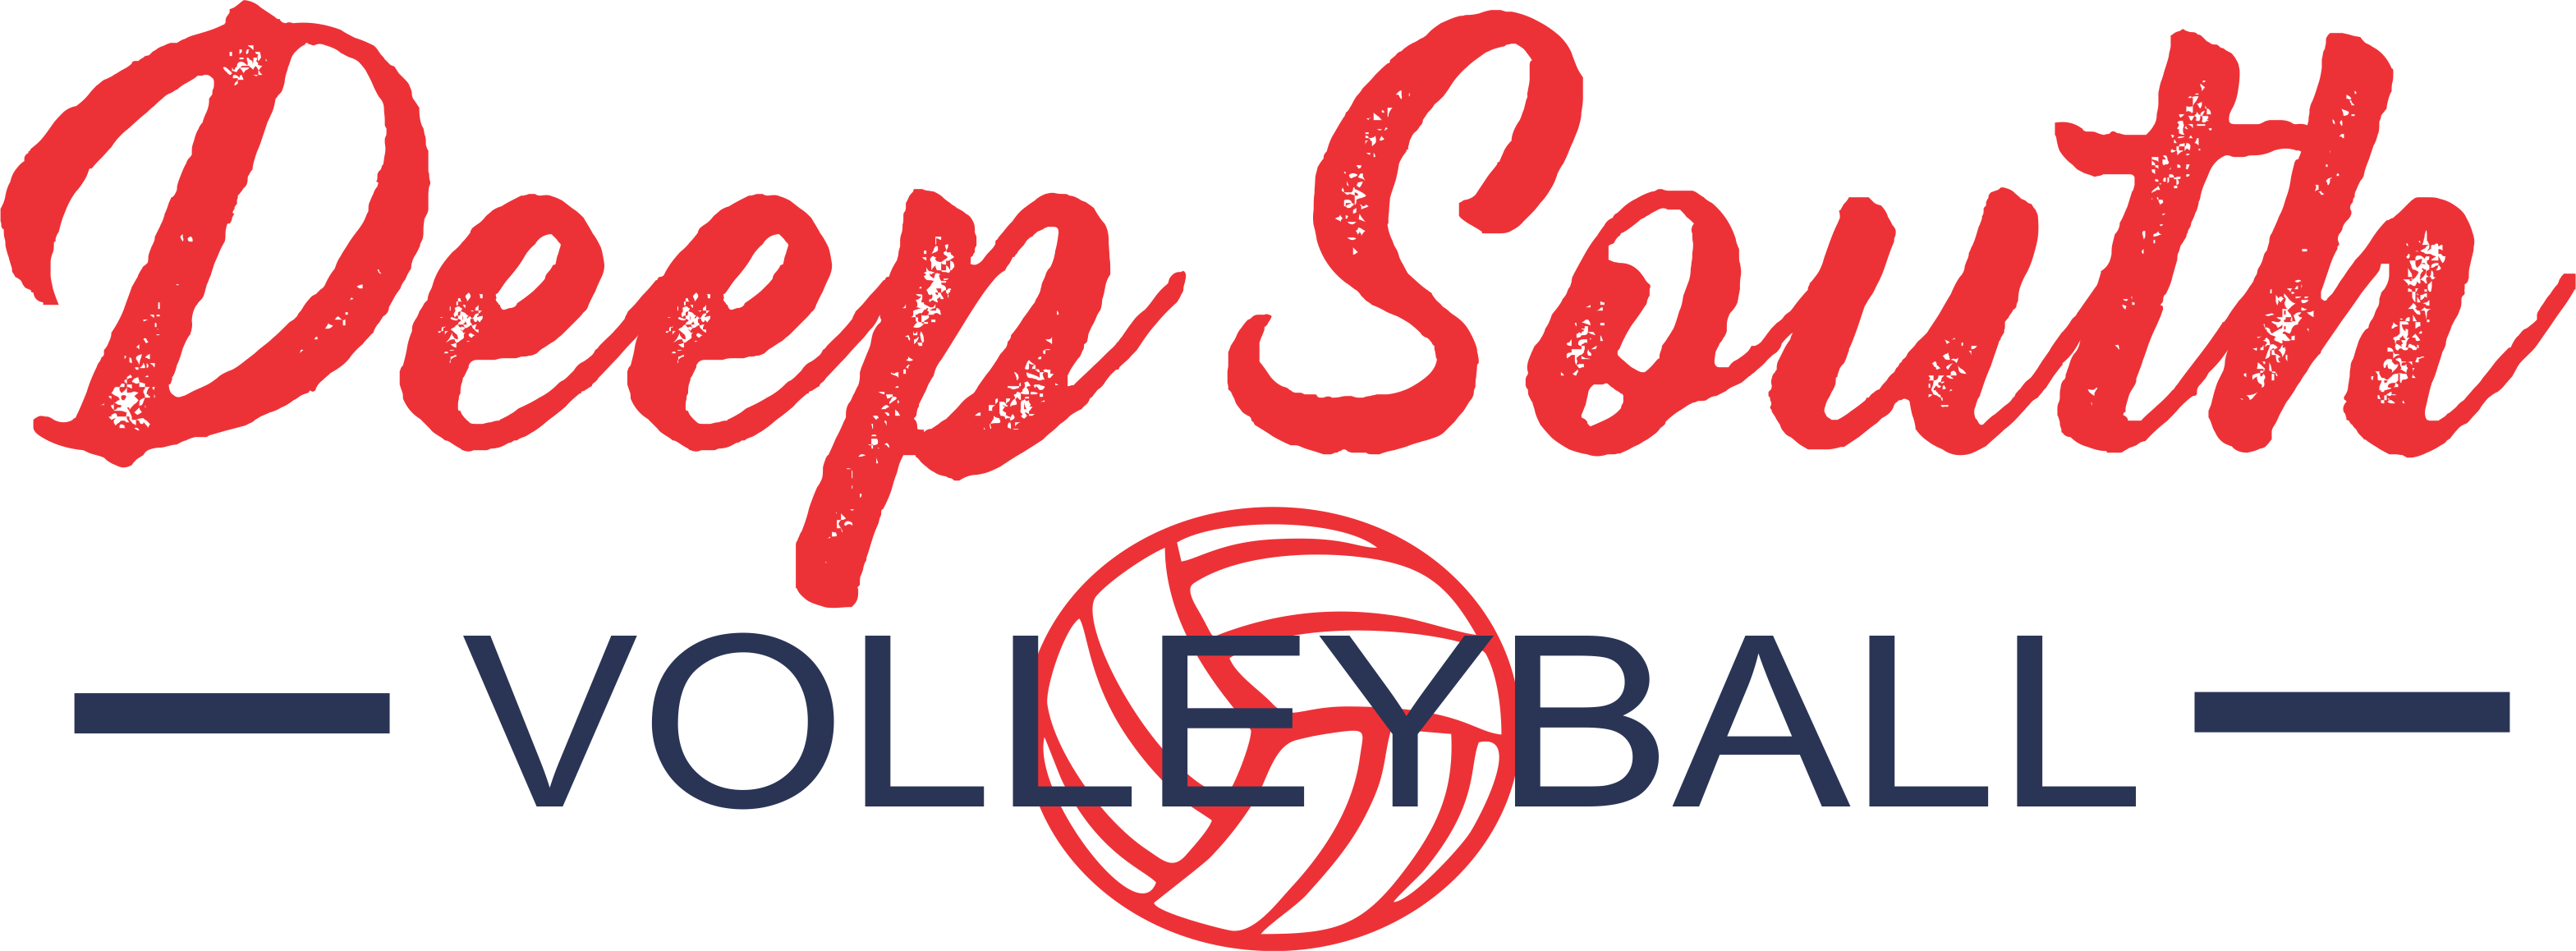 https://thelinkvba.com/wp-content/uploads/2020/02/Deep-South-new-logo.png